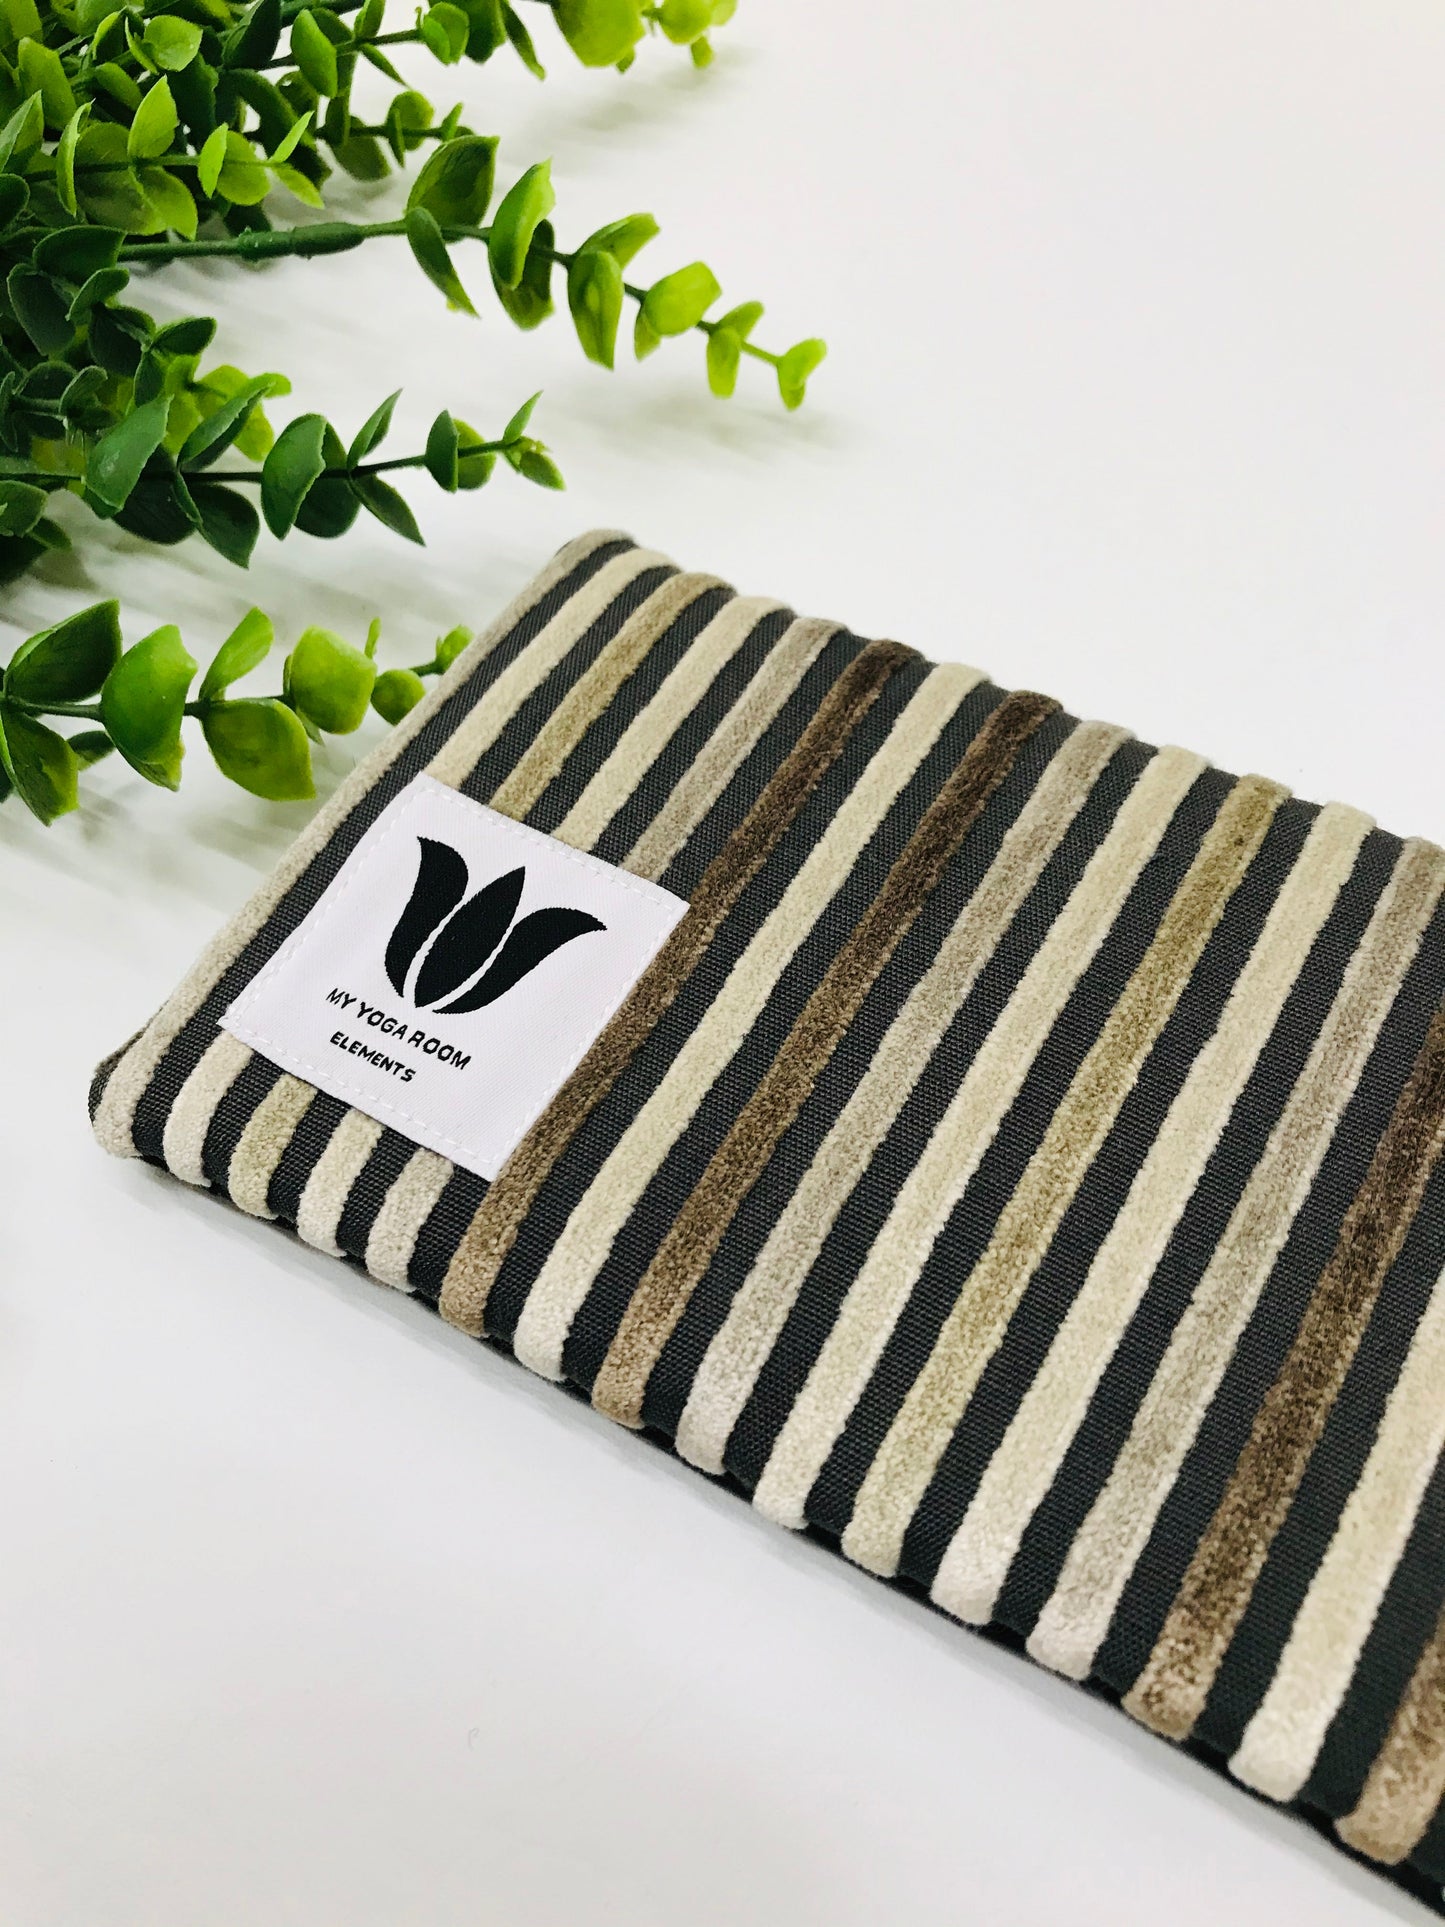 Yoga eye pillow, unscented, therapeutically weighted to soothe eye strain and stress or enhance your savasana. Handcrafted in Canada by My Yoga Room Elements. Brown plush stripe print and bamboo fabric.